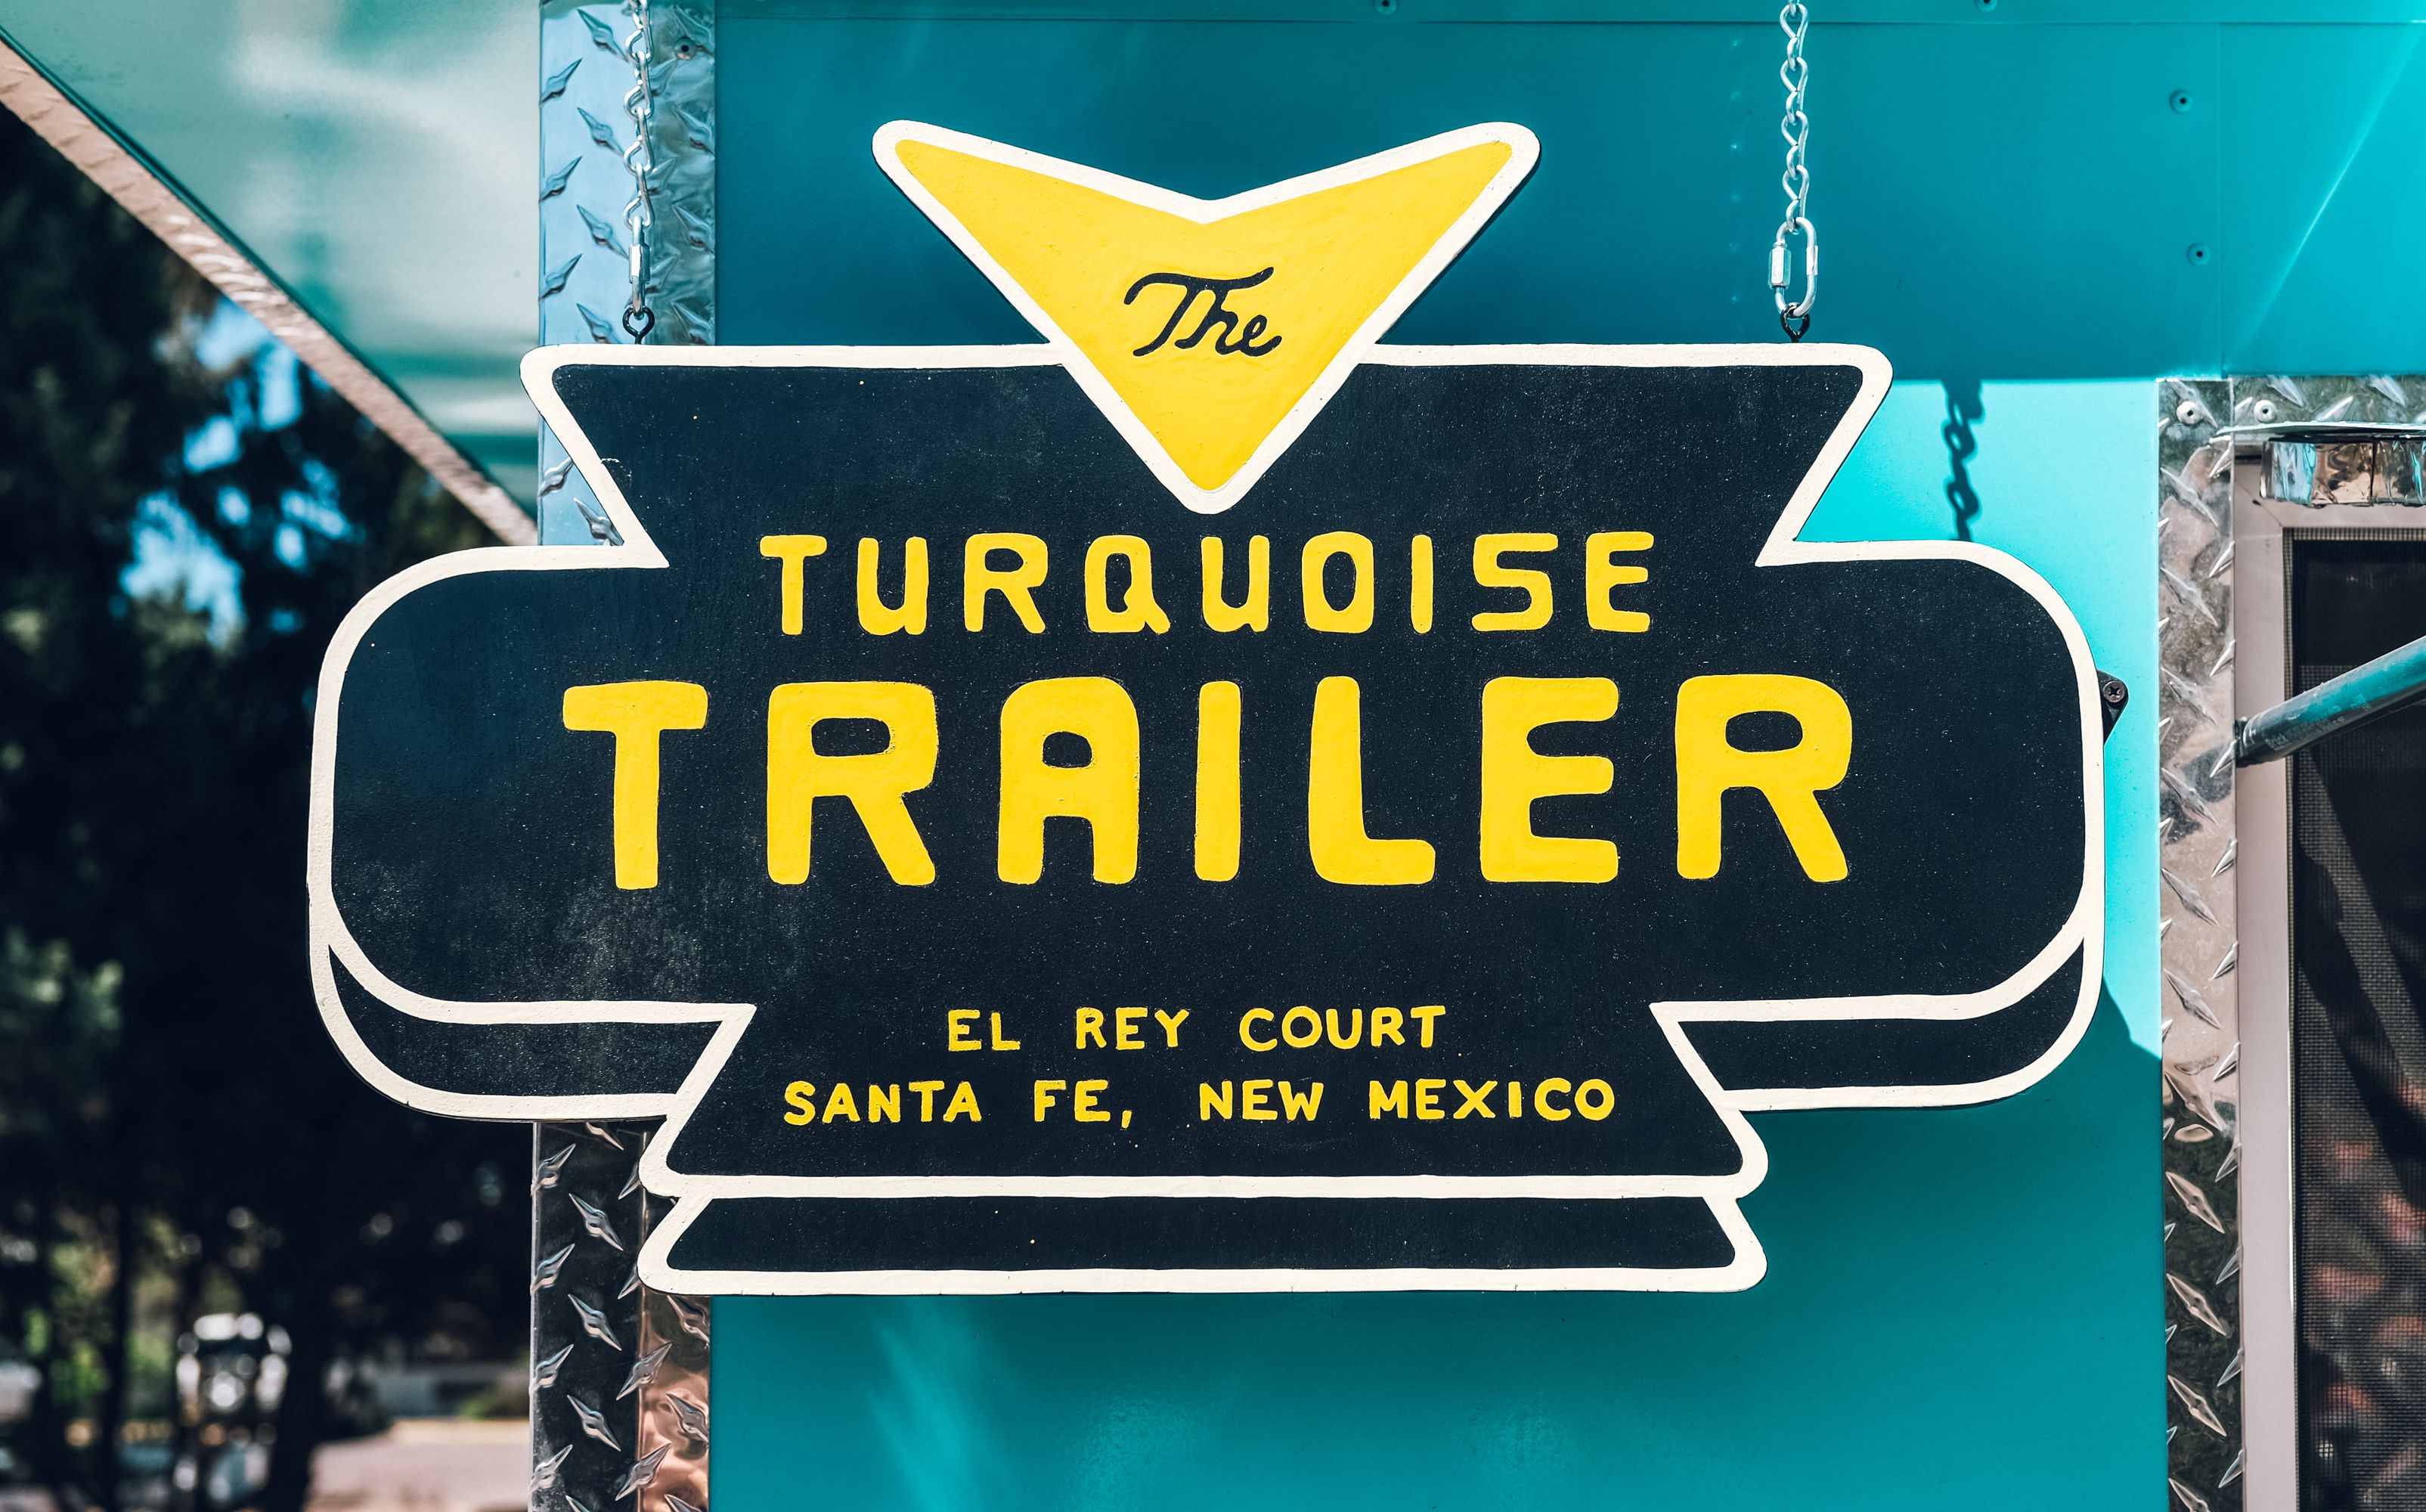 Turquoise Trailer food truck sign 